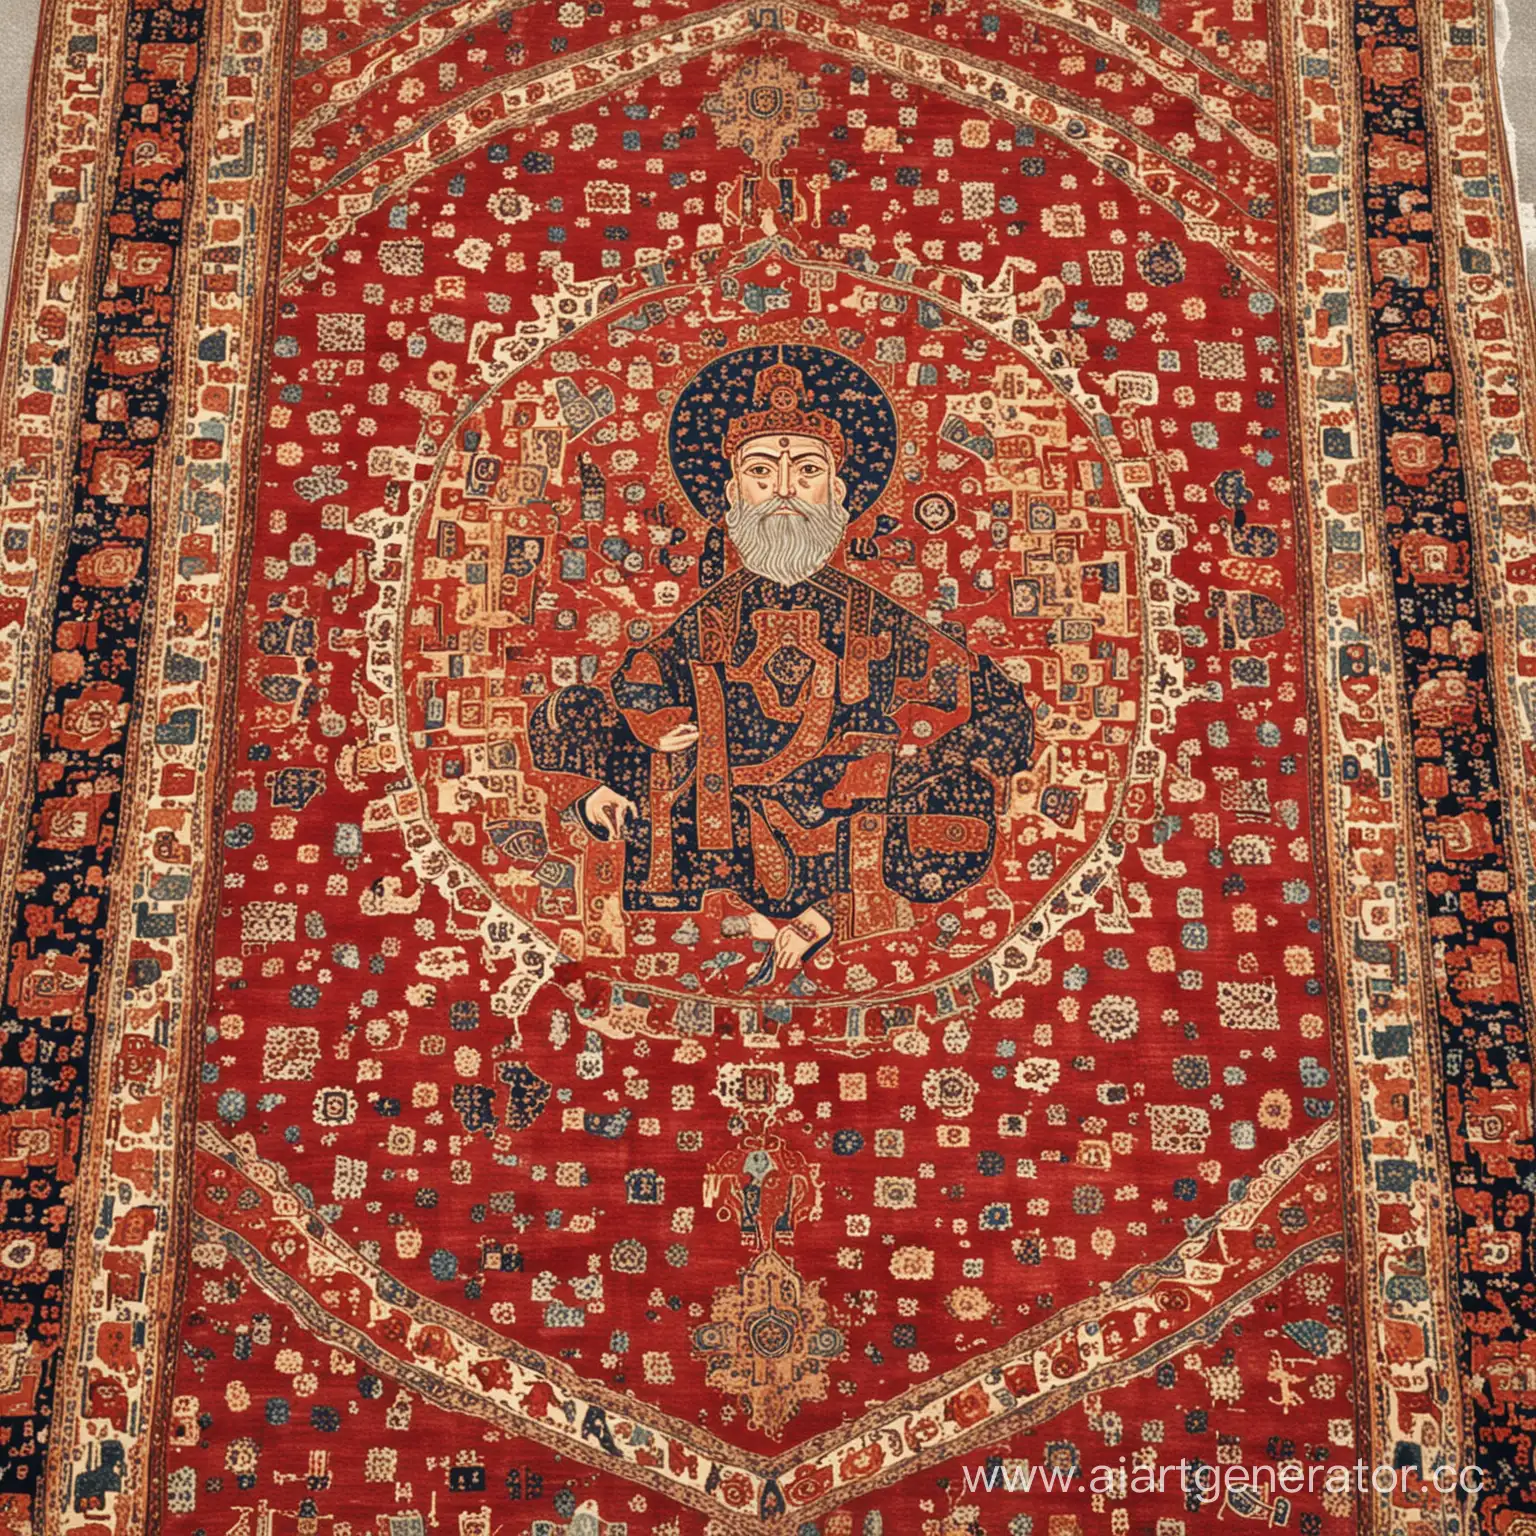 Mystical-Deity-of-Vibrant-Carpets-An-Enigmatic-Figure-in-a-World-of-Woven-Wonders